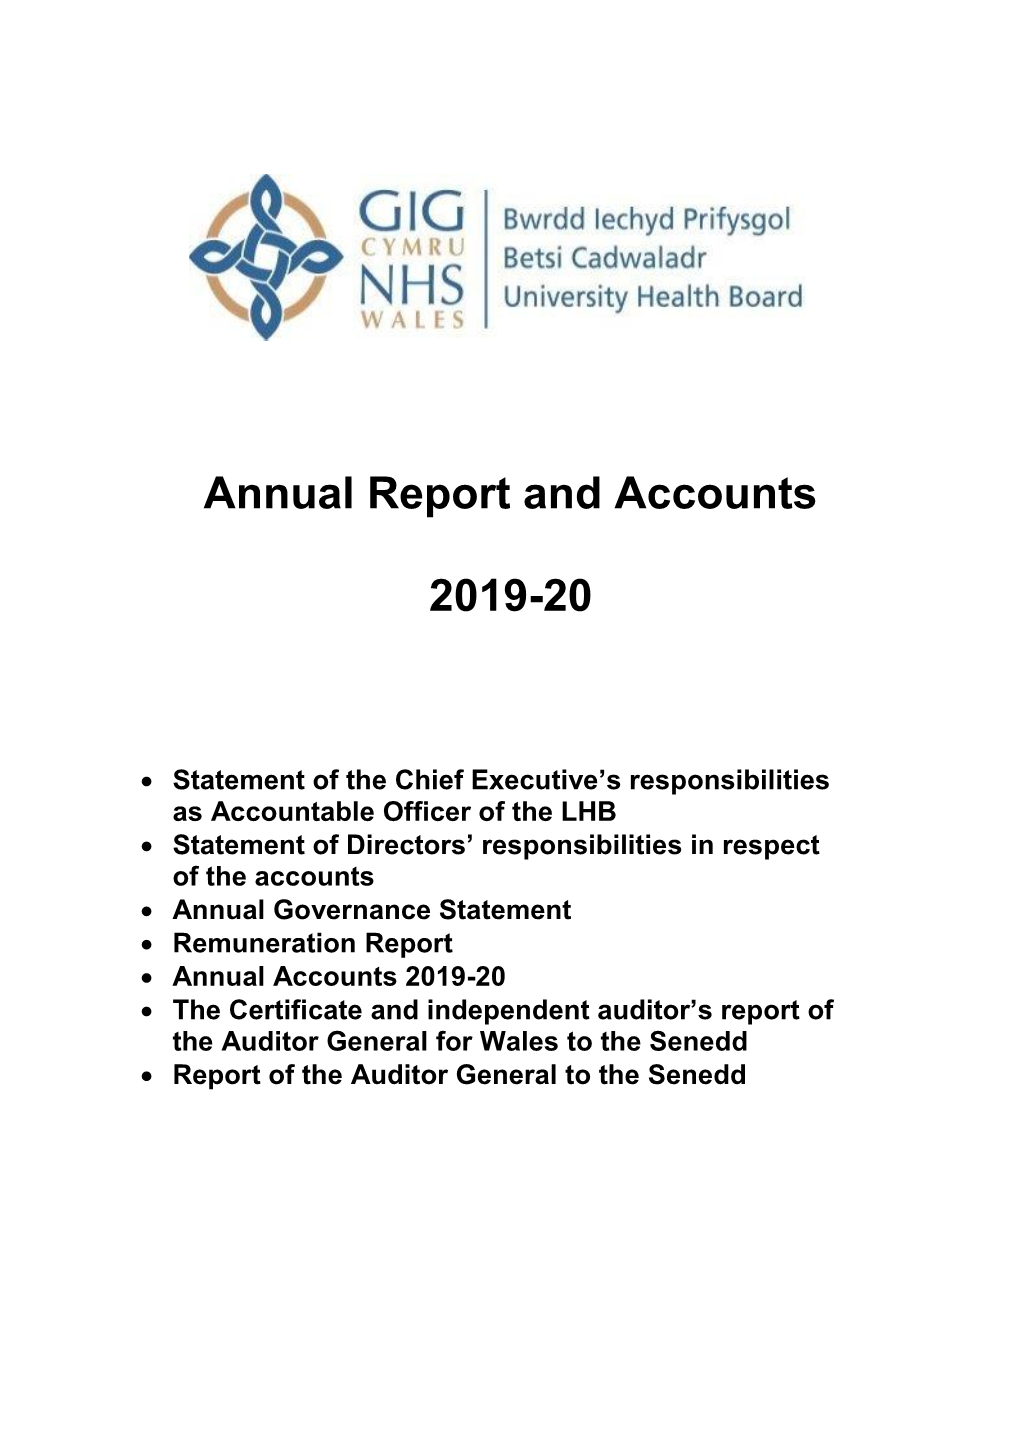 Annual Report and Accounts 2019-20